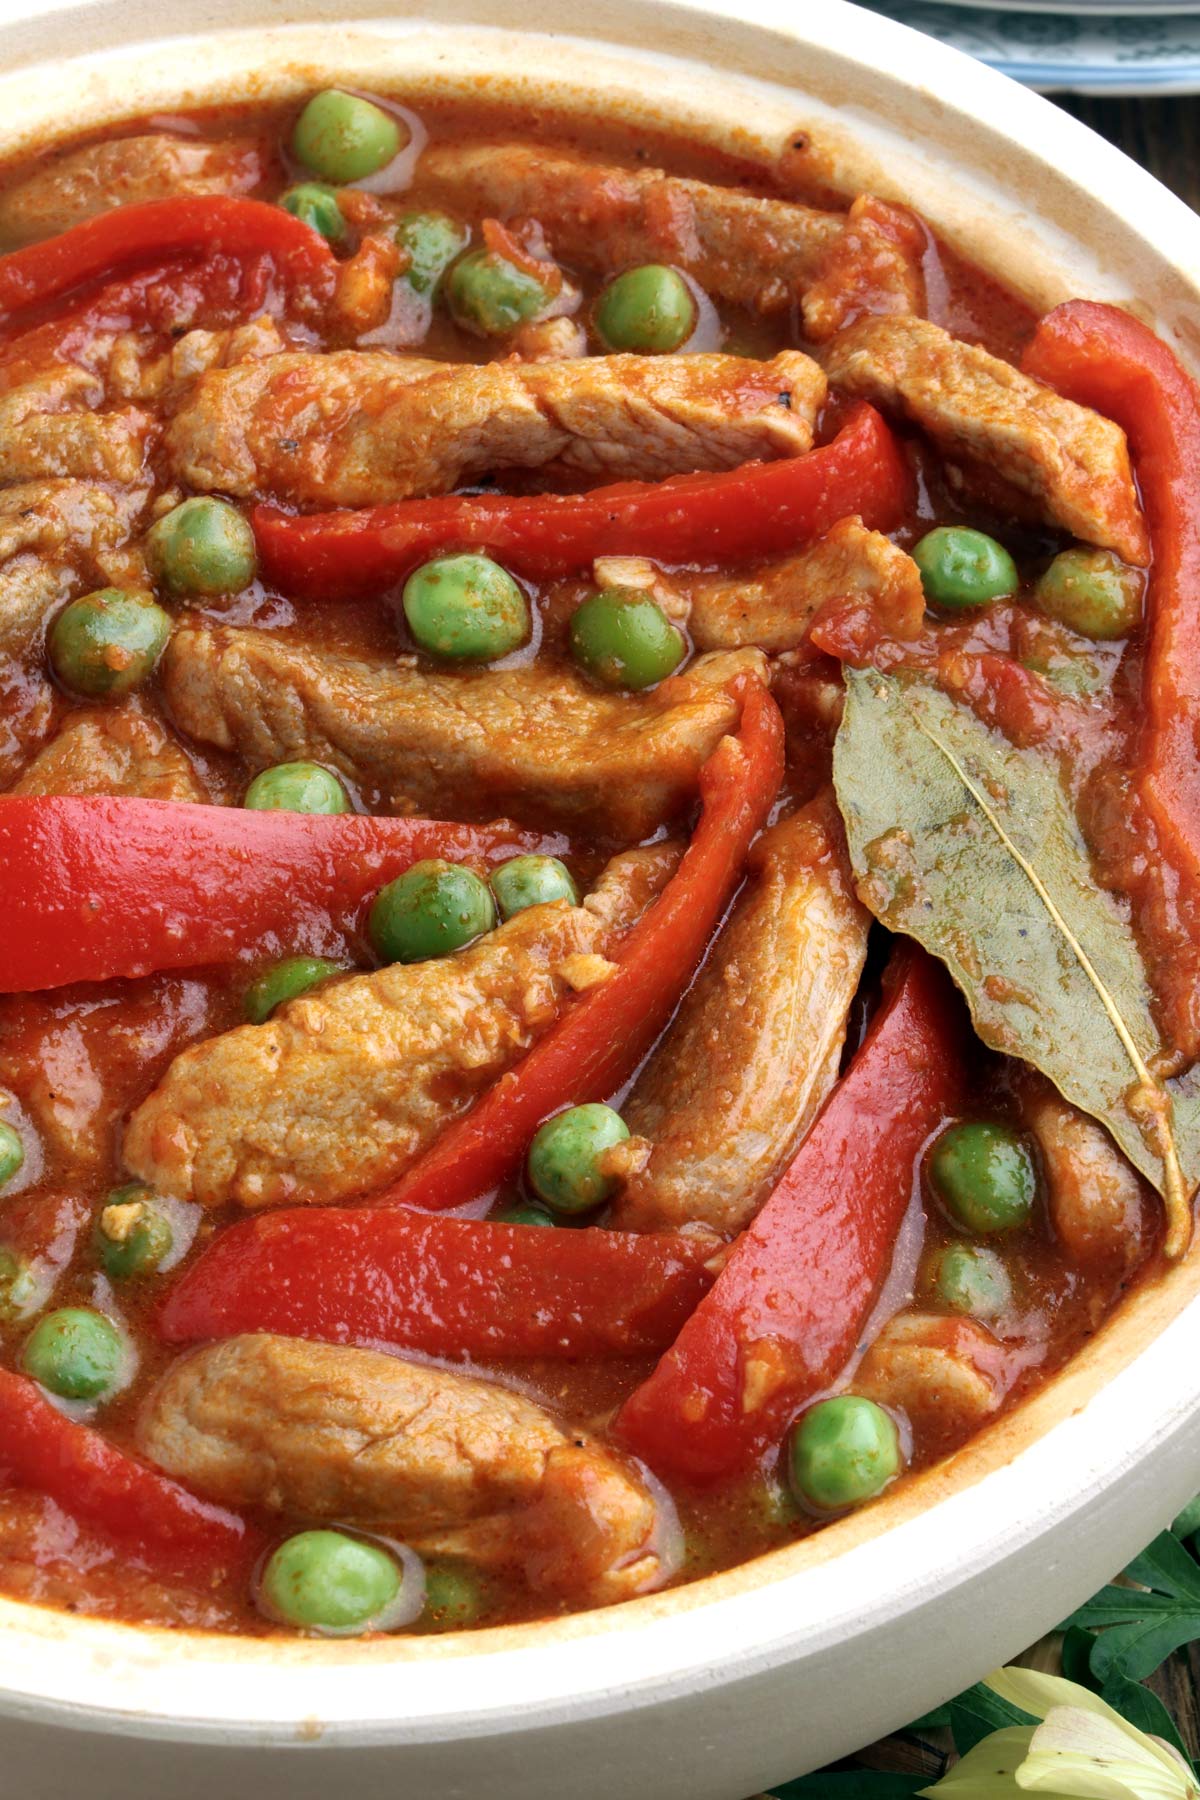 Pork strip in tomato-based stew with green peas.